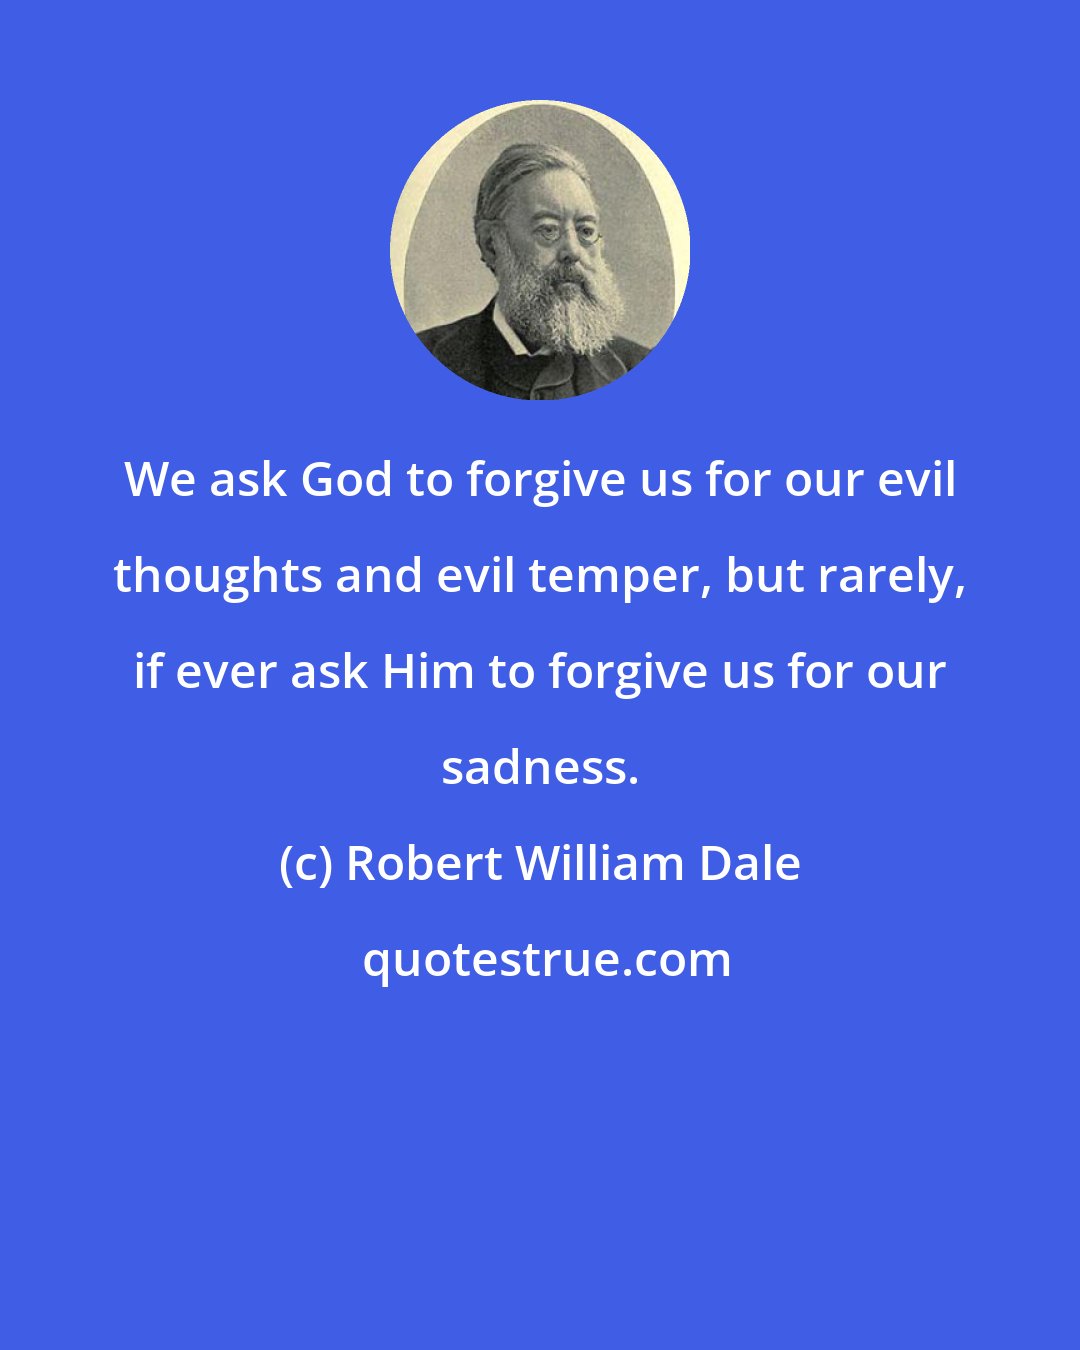 Robert William Dale: We ask God to forgive us for our evil thoughts and evil temper, but rarely, if ever ask Him to forgive us for our sadness.